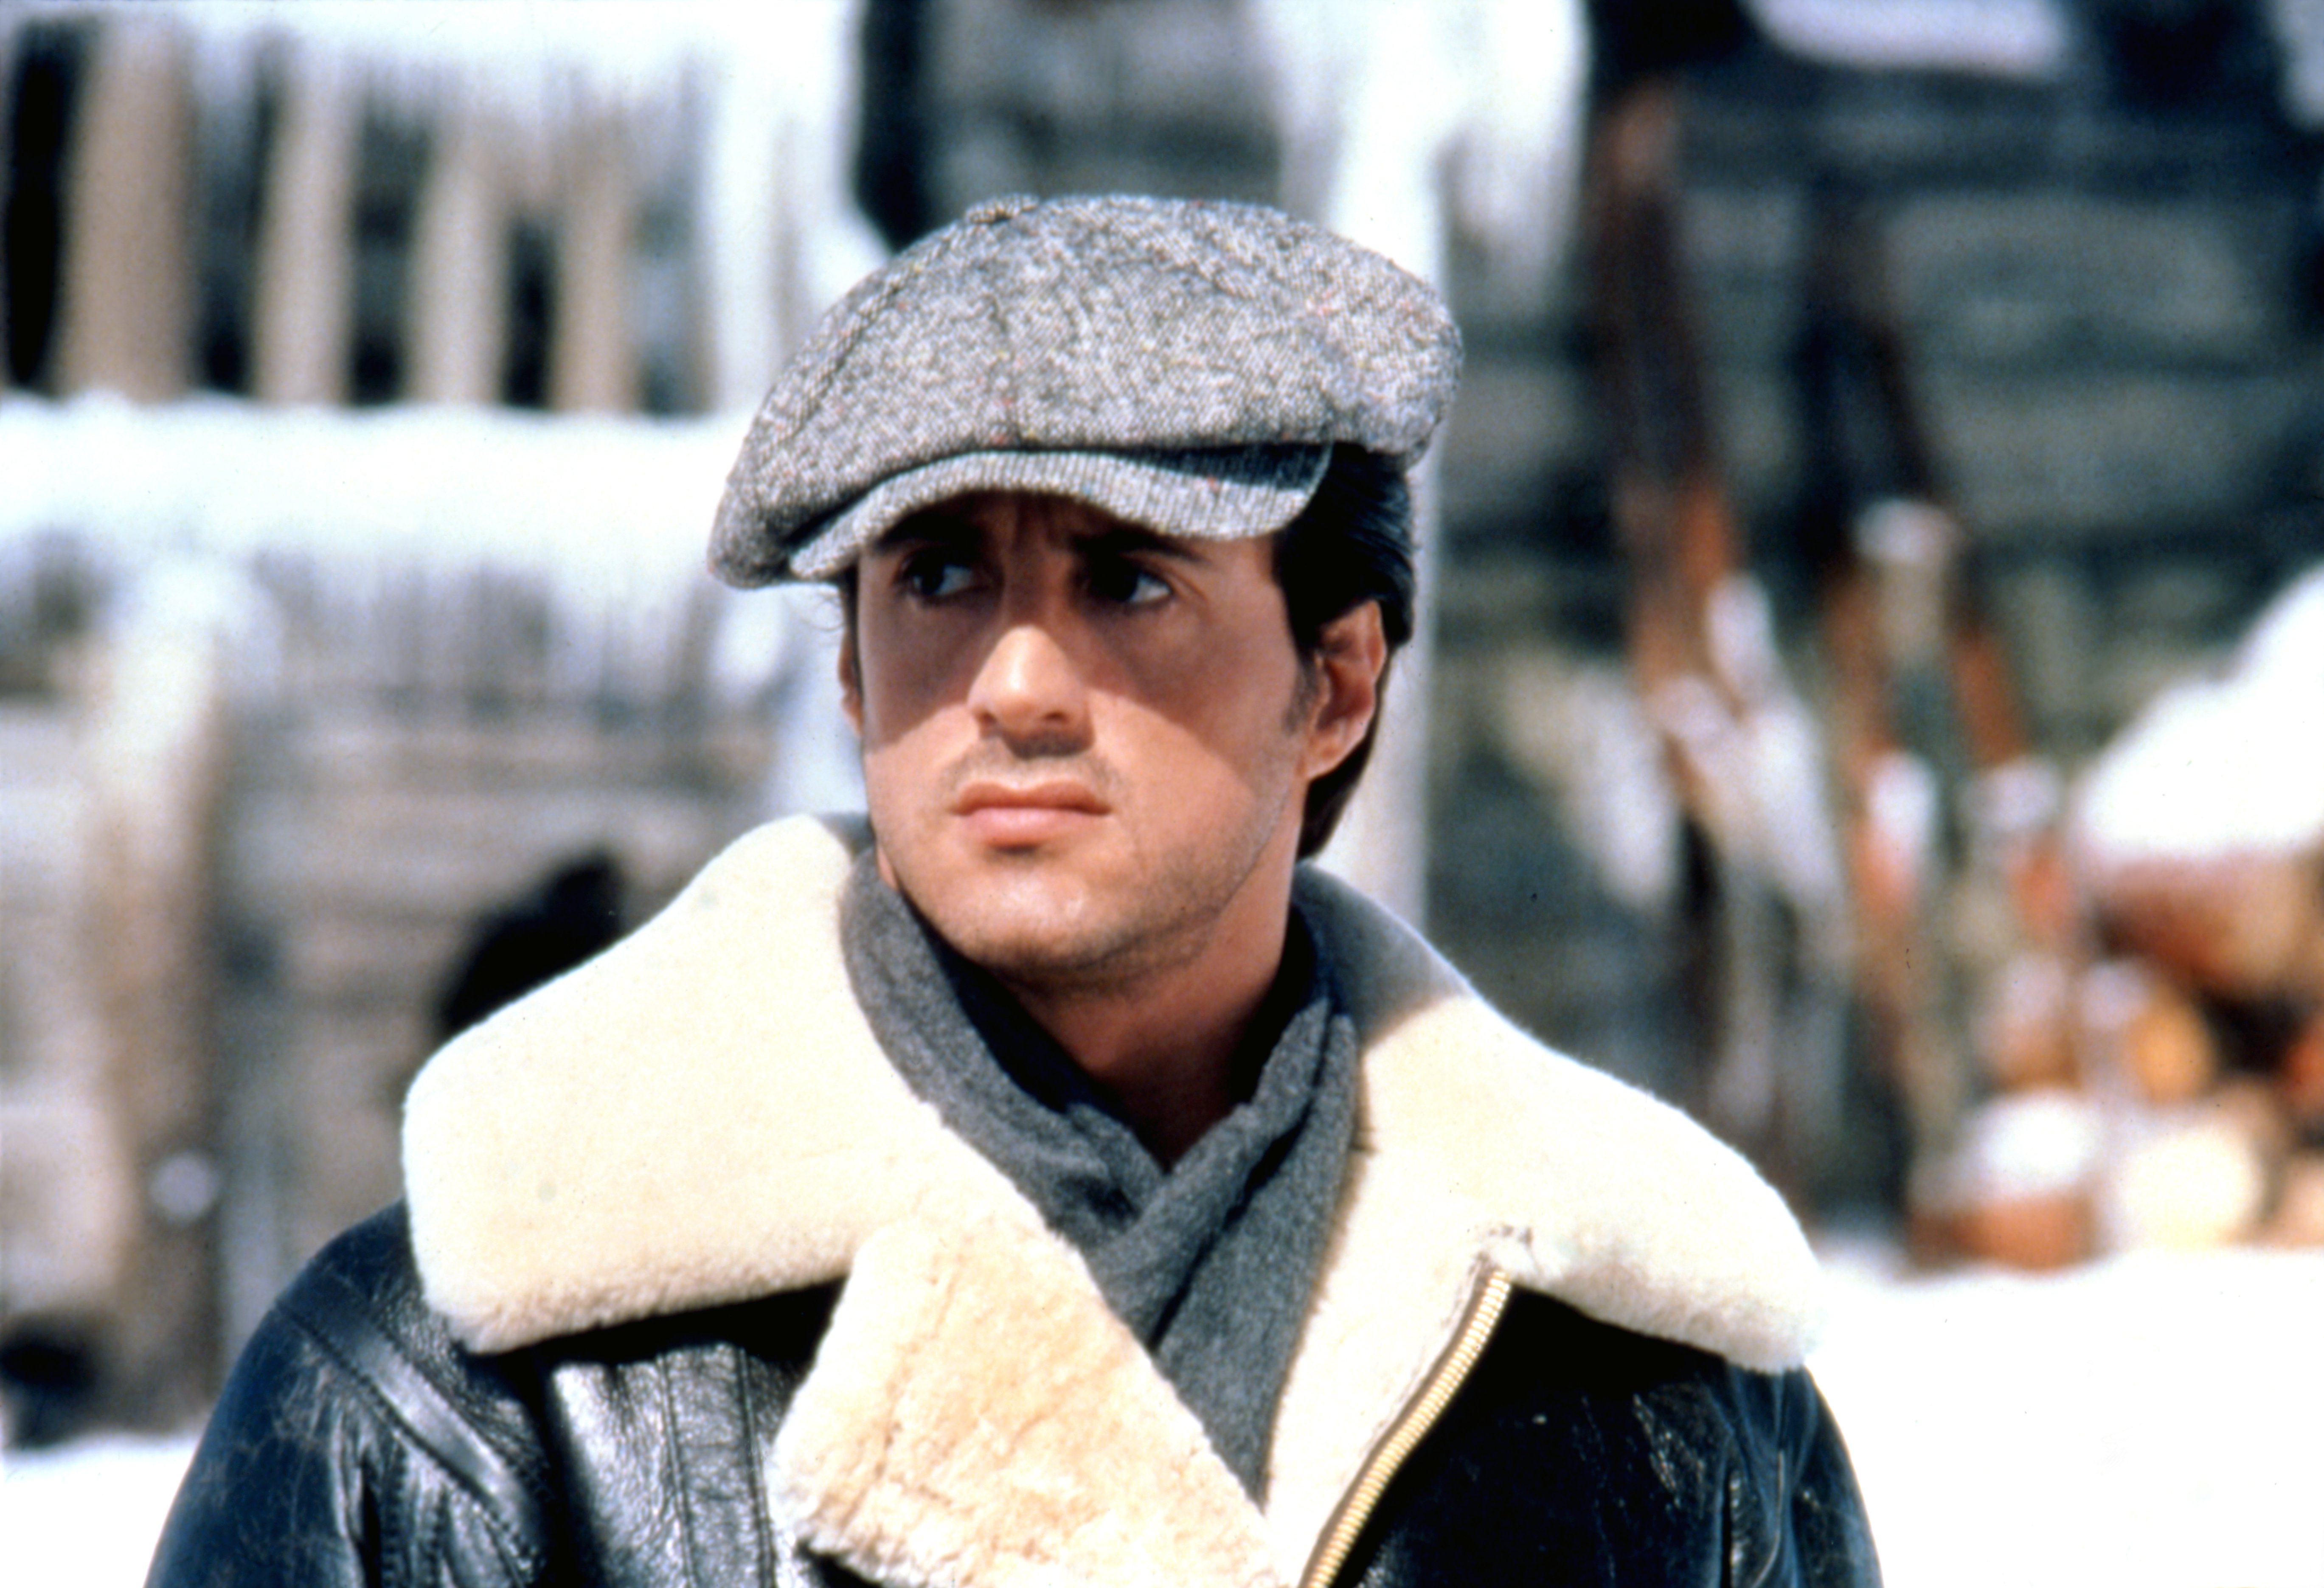 Sylvester Stallone on the set of "Rocky IV," circa 1985. | Source: Getty Images